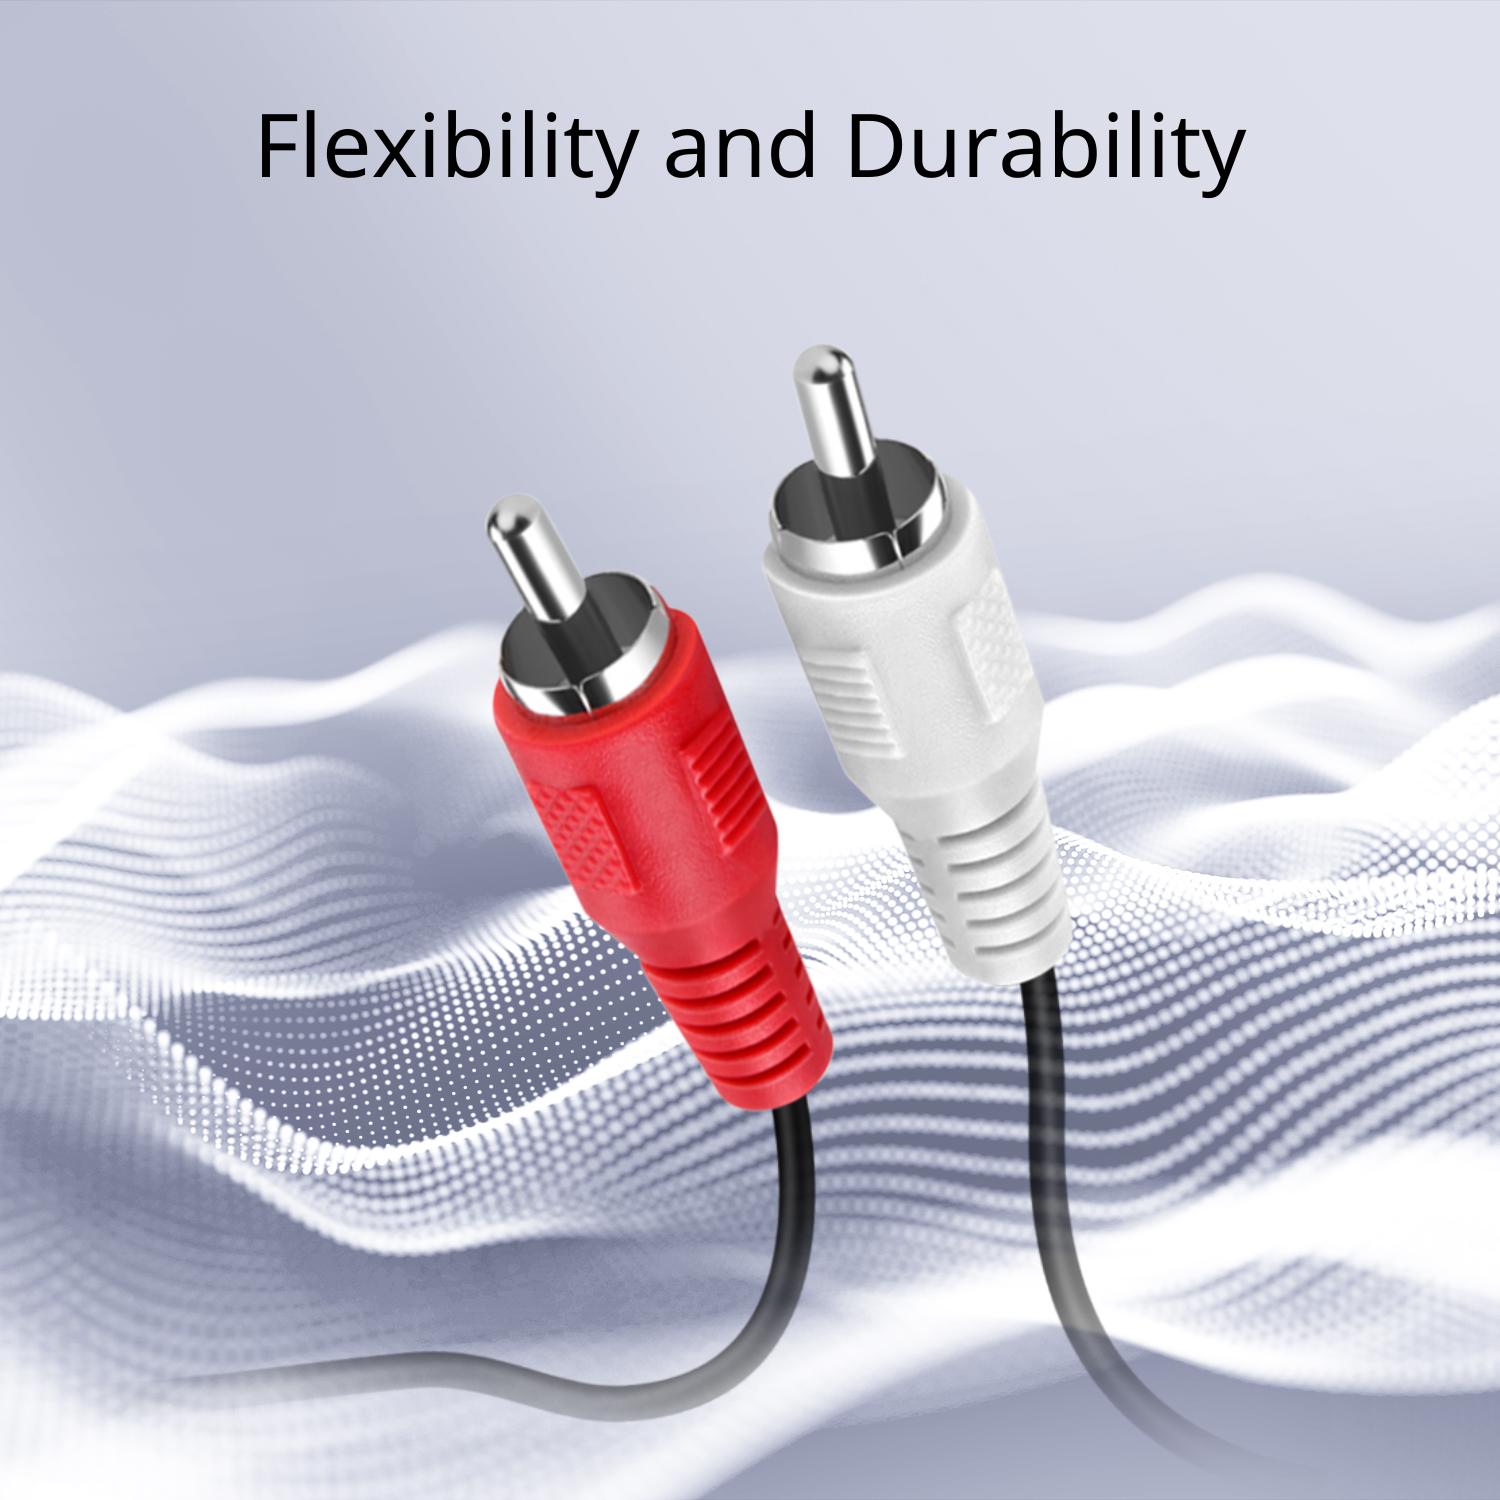 2RCA Stereo Audio Cable (15 Feet) - Dual Composite RCA Male Connector M/M 2 Channel (Right and Left) (Red and White) Shielded 2RCA to 2RCA AV Sound Plug Jack Wire Cord - image 3 of 6